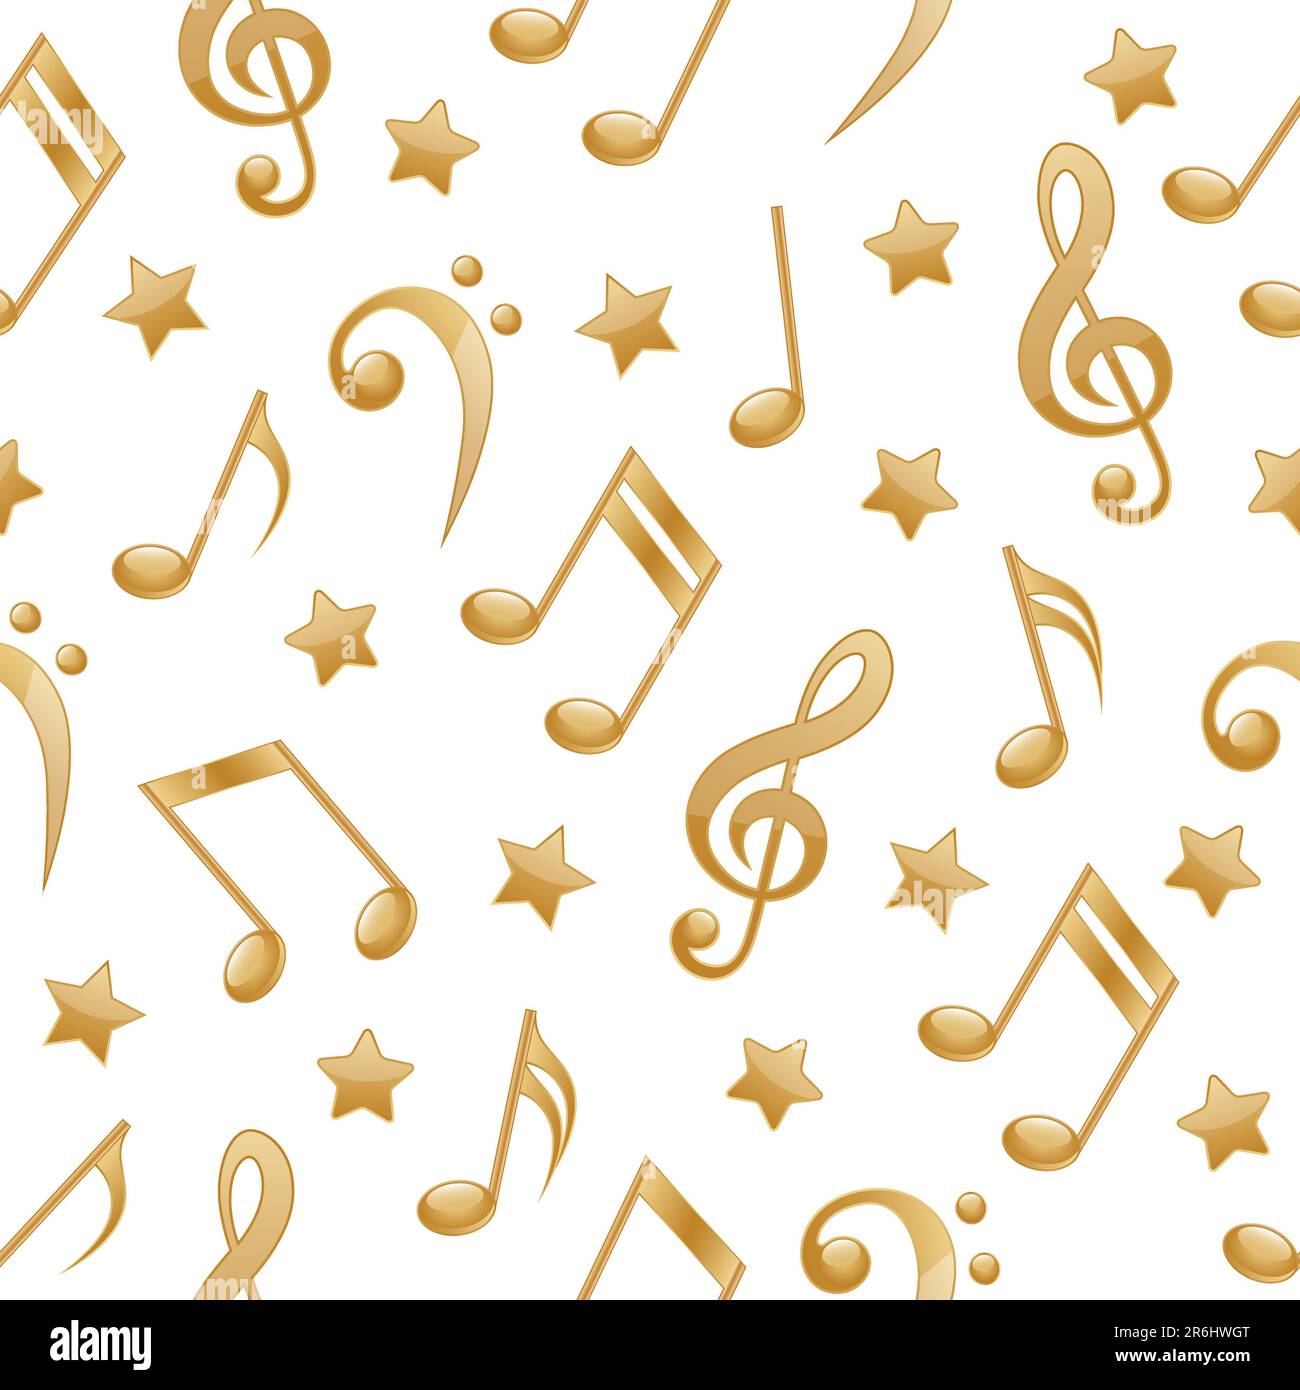 Seamless pattern with a music notes. Stock Vector